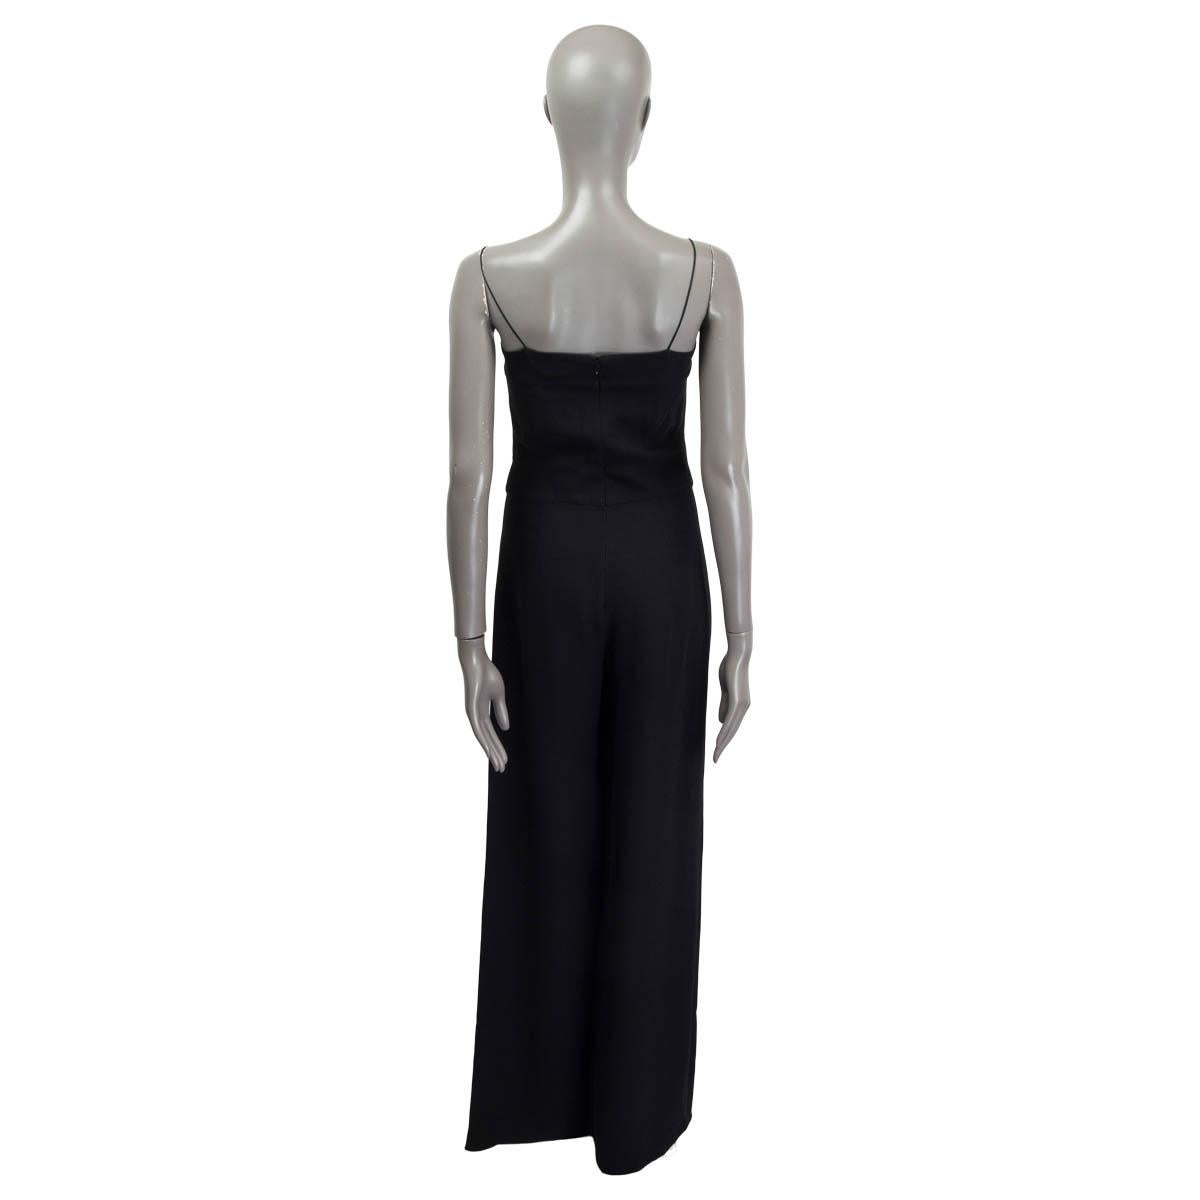 100% authentic Chanel sleeveless jumpsuit in black silk (100%). Features breast pads and opens with a concealed zipper and a hook on the back. Unlined. The zipper is broken but it is still working otherwise in excellent condition. 

Measurements
Tag